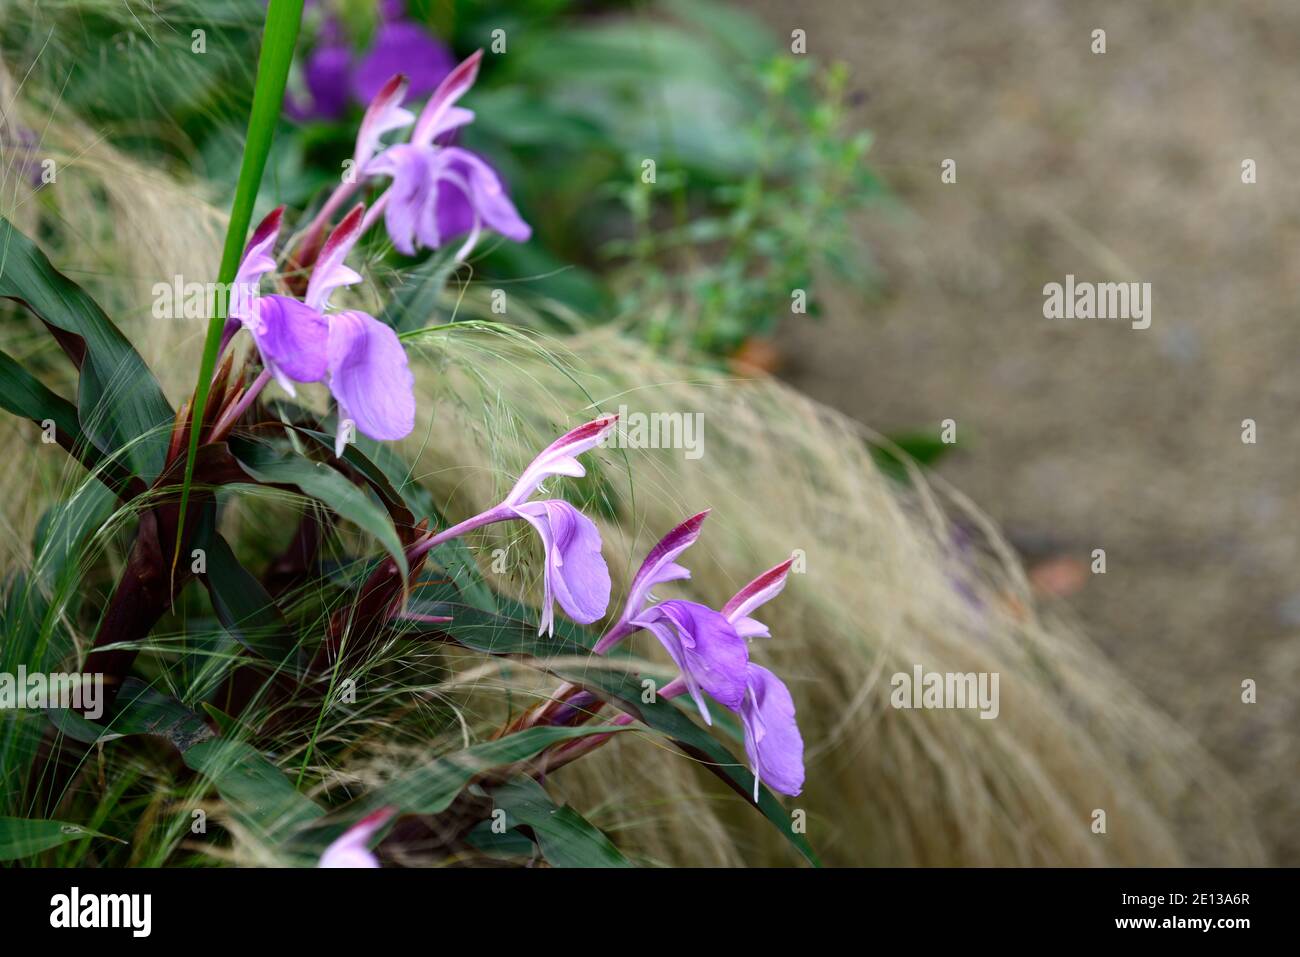 roscoea purpurea spice island,lilac flowers,purple flower,showy orchid-like flowers,flowering,Stipa tenuissima Pony Tails,grass,grasses,mixed planting Stock Photo